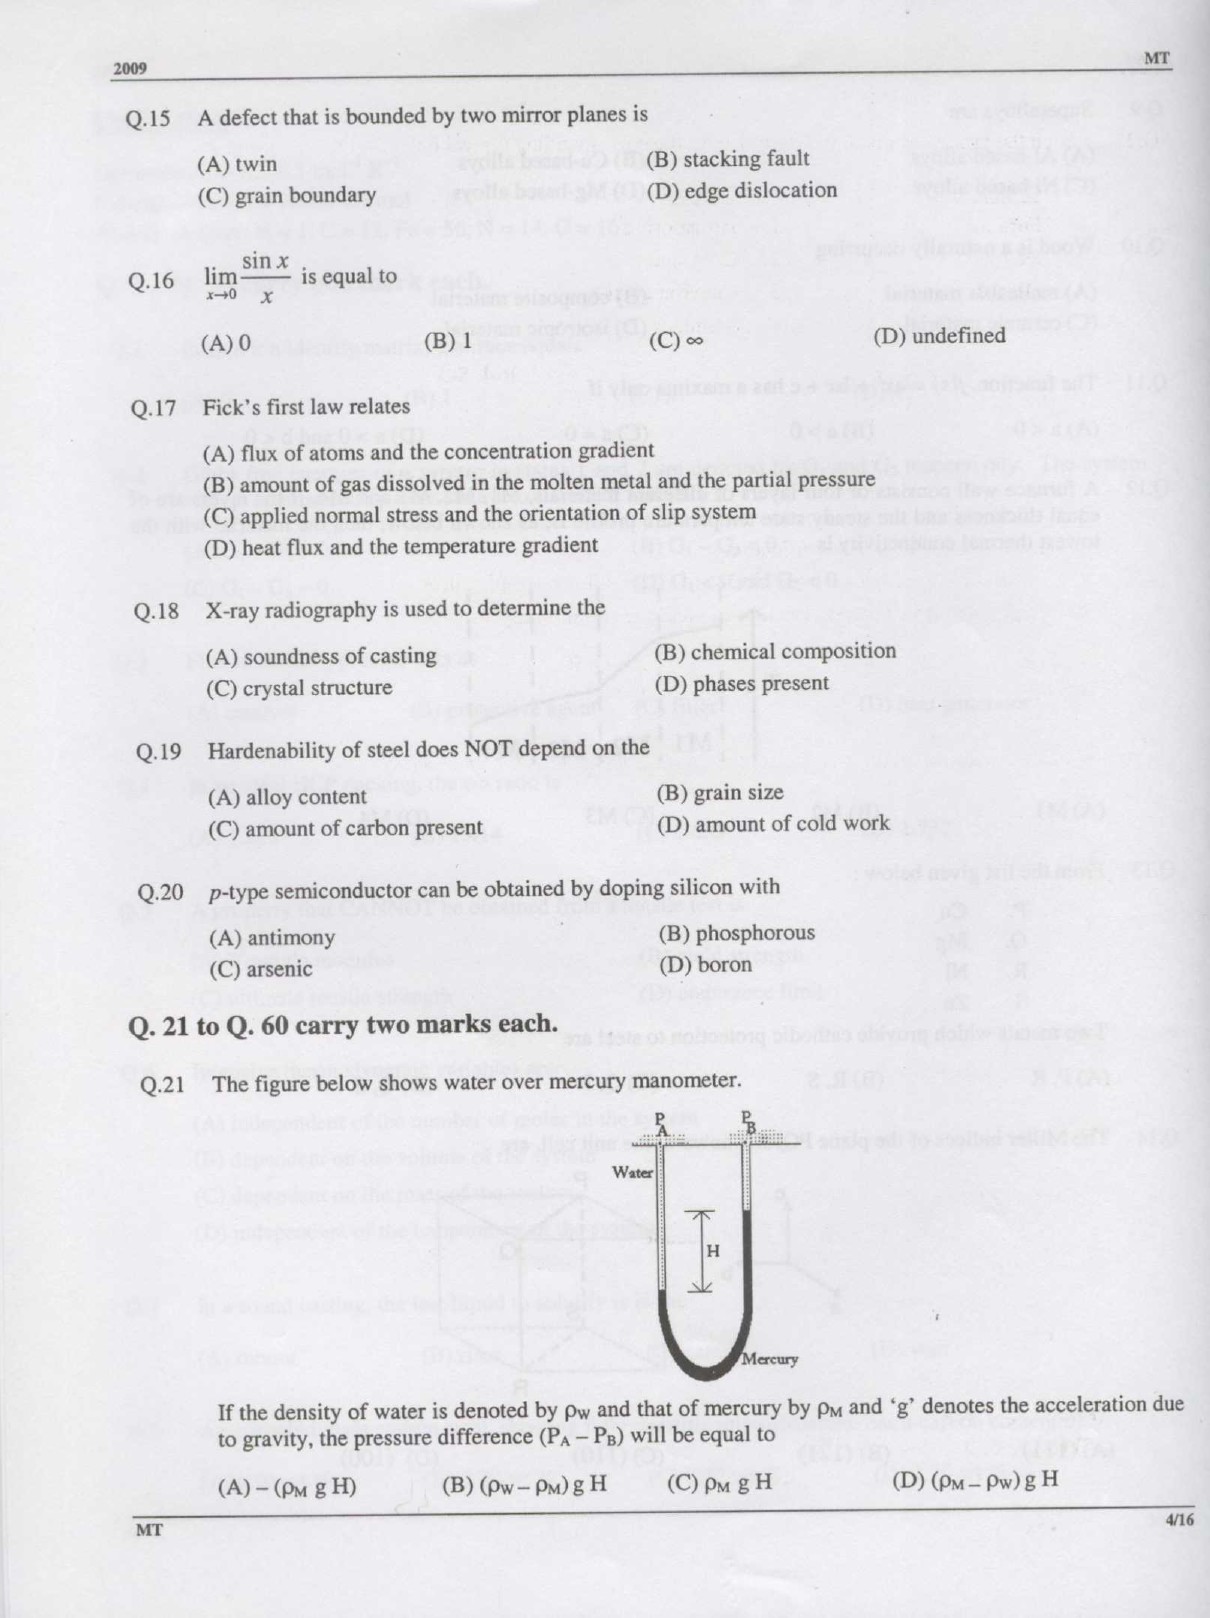 GATE Exam Question Paper 2009 Metallurgical Engineering 4